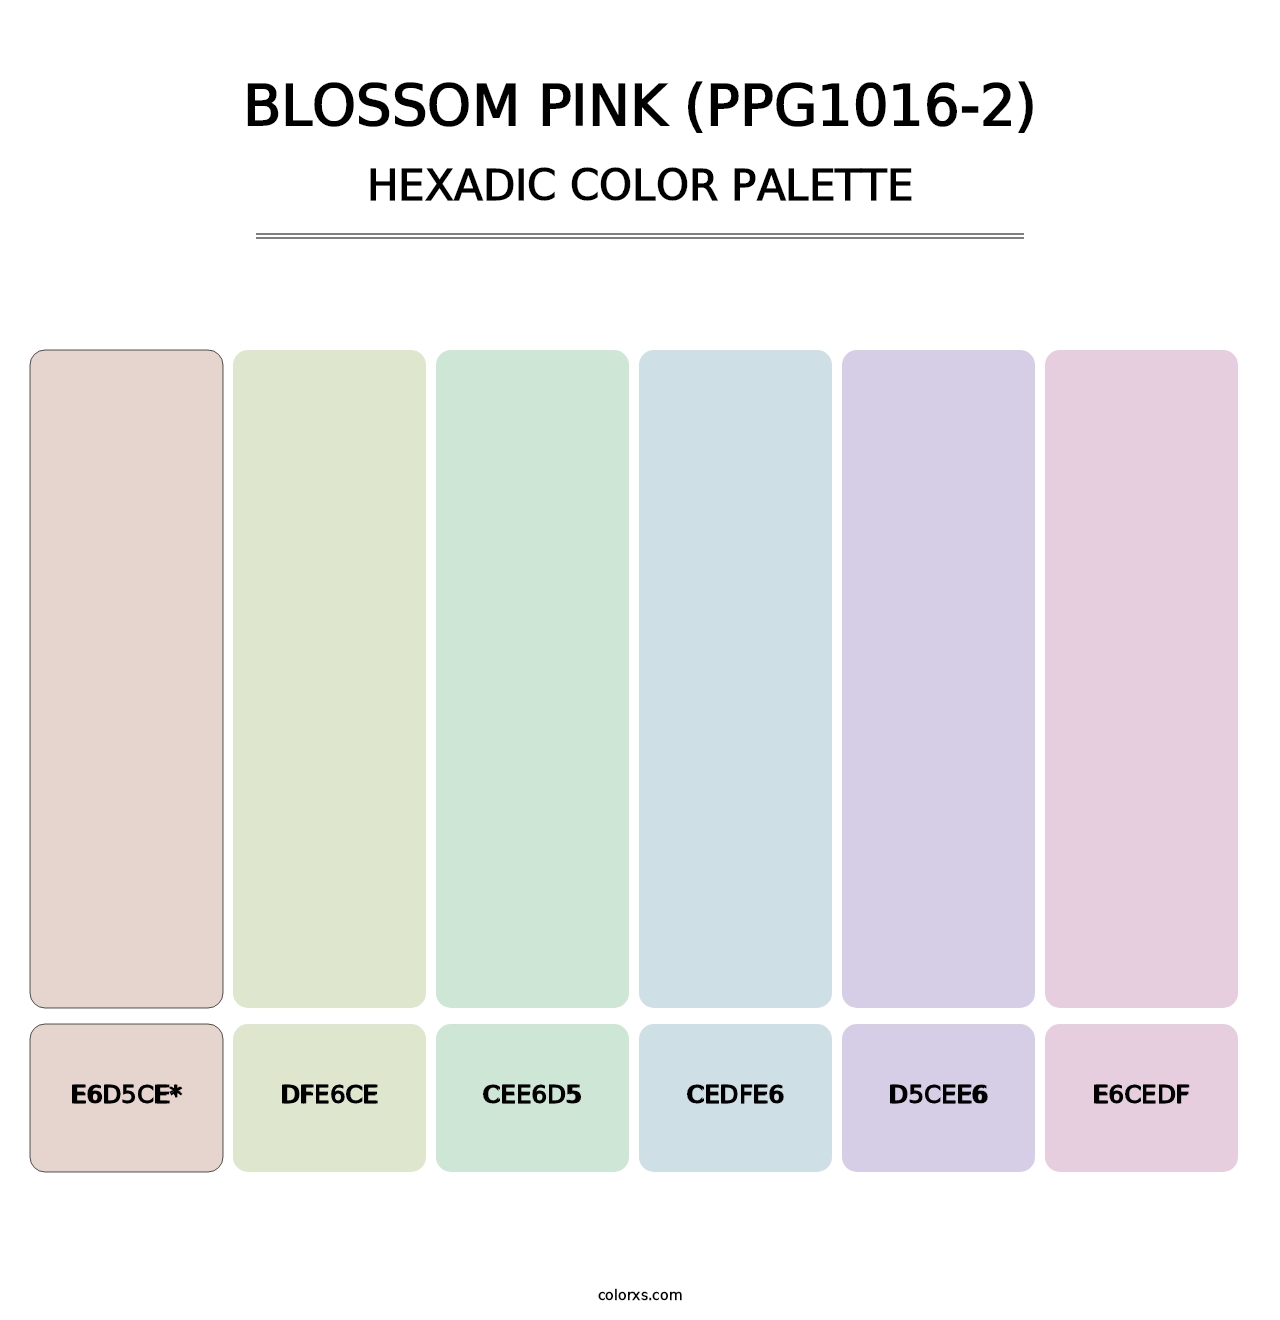 Blossom Pink (PPG1016-2) - Hexadic Color Palette